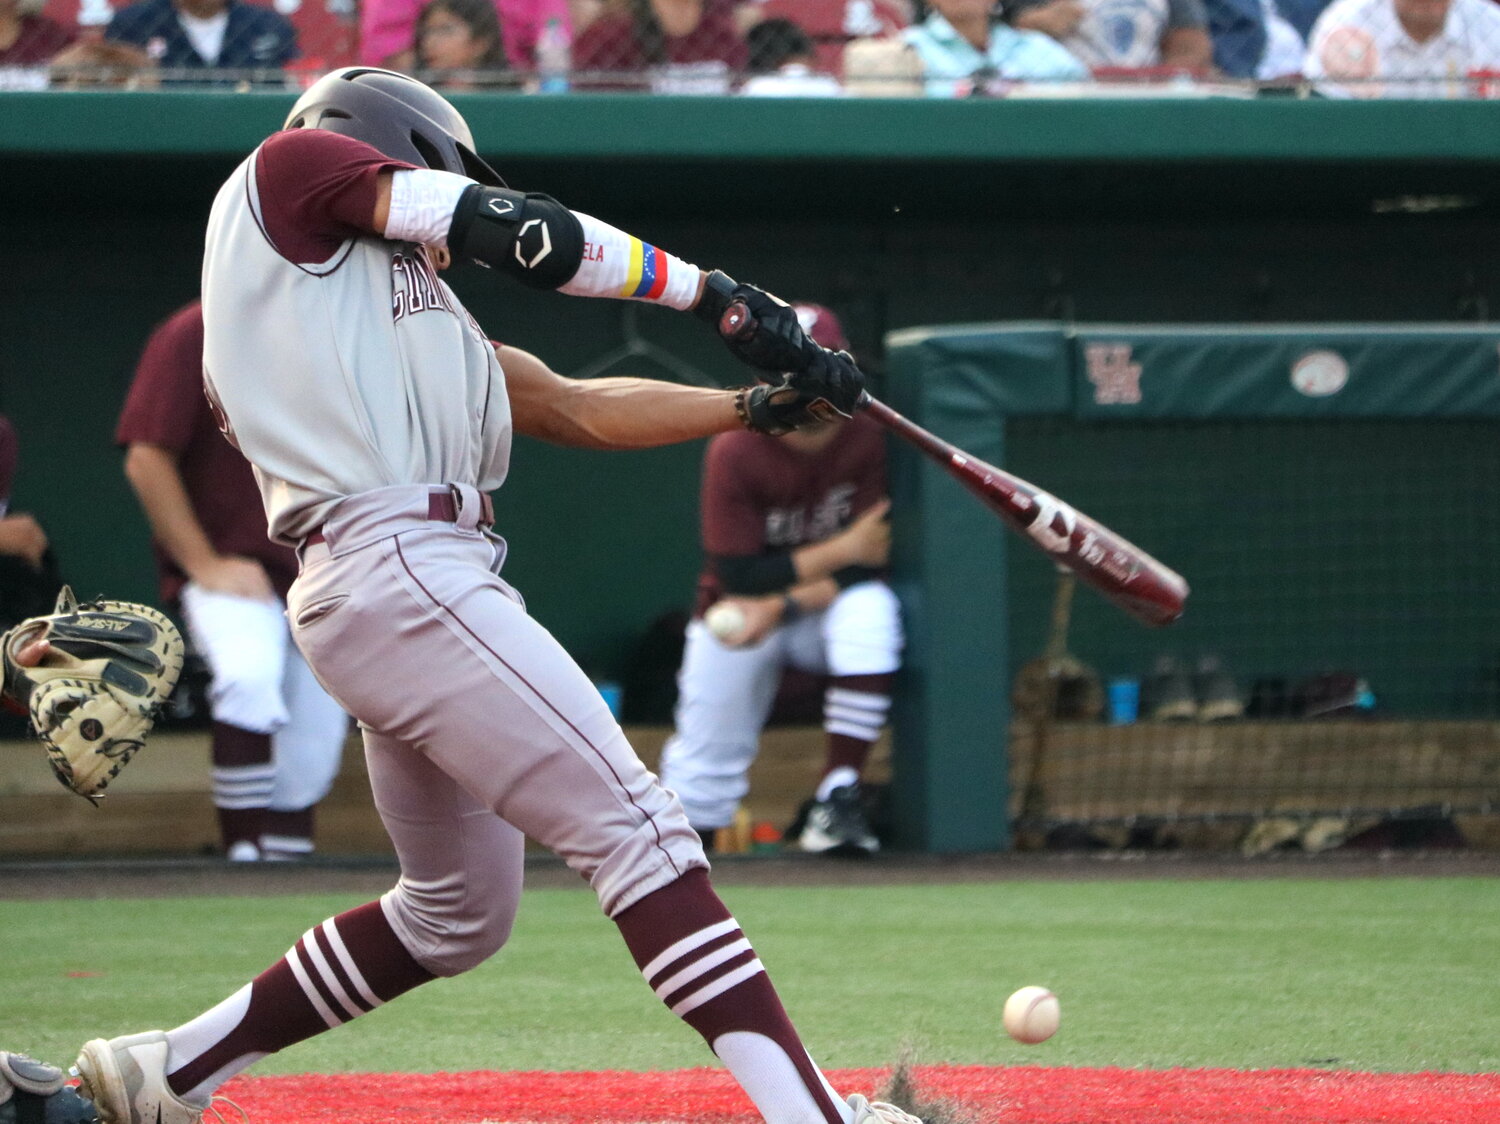 Paul Acosta hits during Friday's regional semifinal between Cinco Ranch and Pearland at The University of Houston.